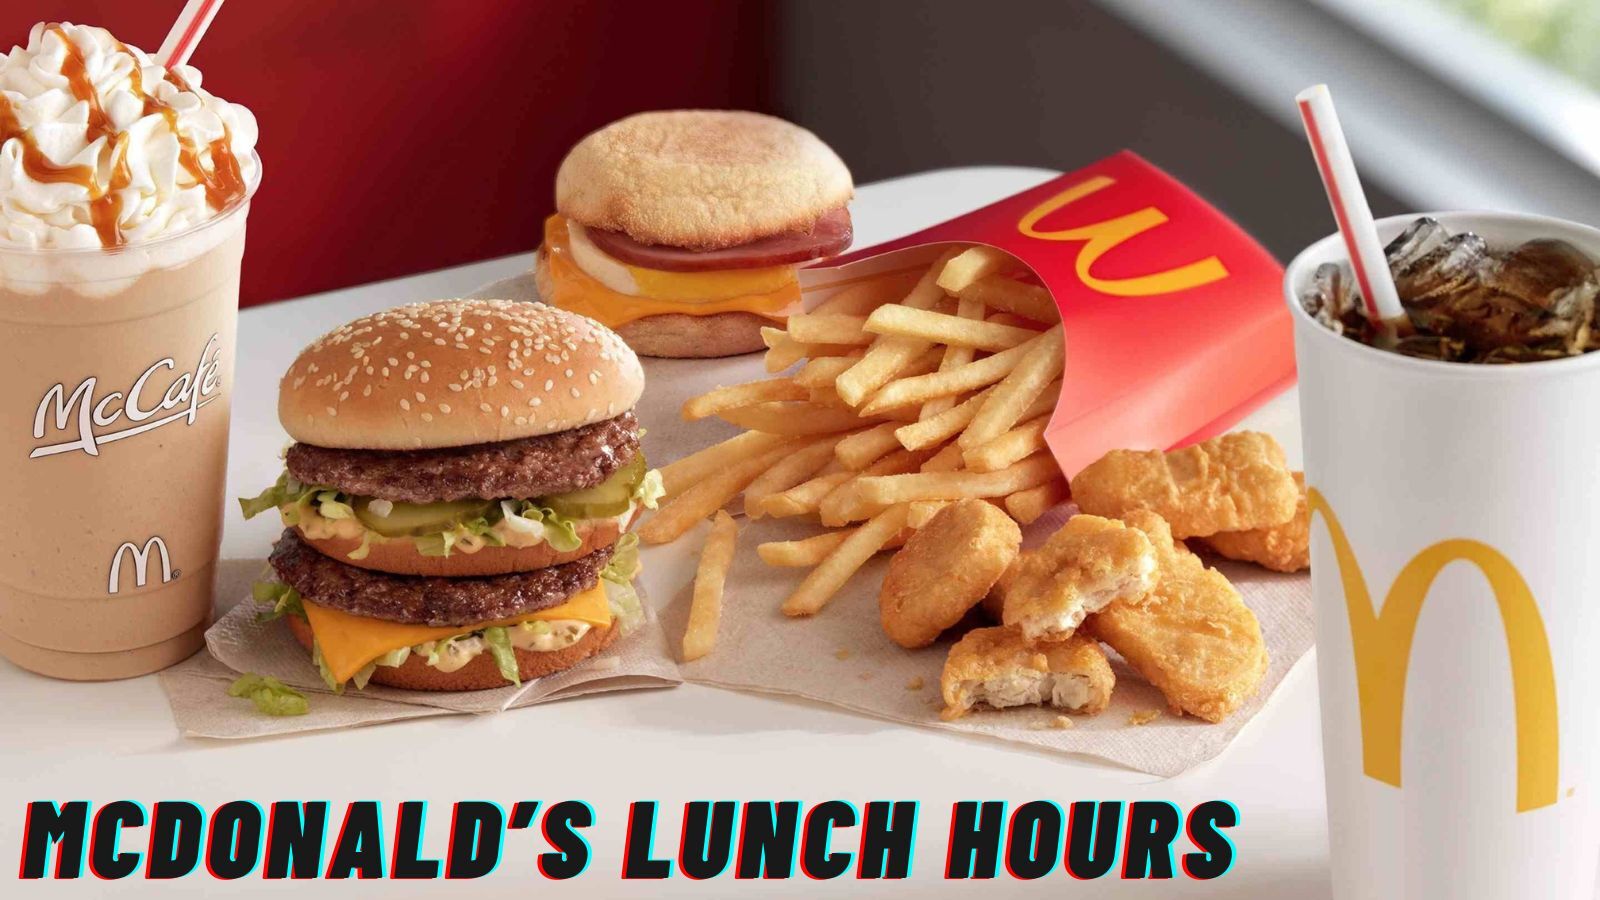 McDonald’s Lunch Hours: Something You Might Be Interested In